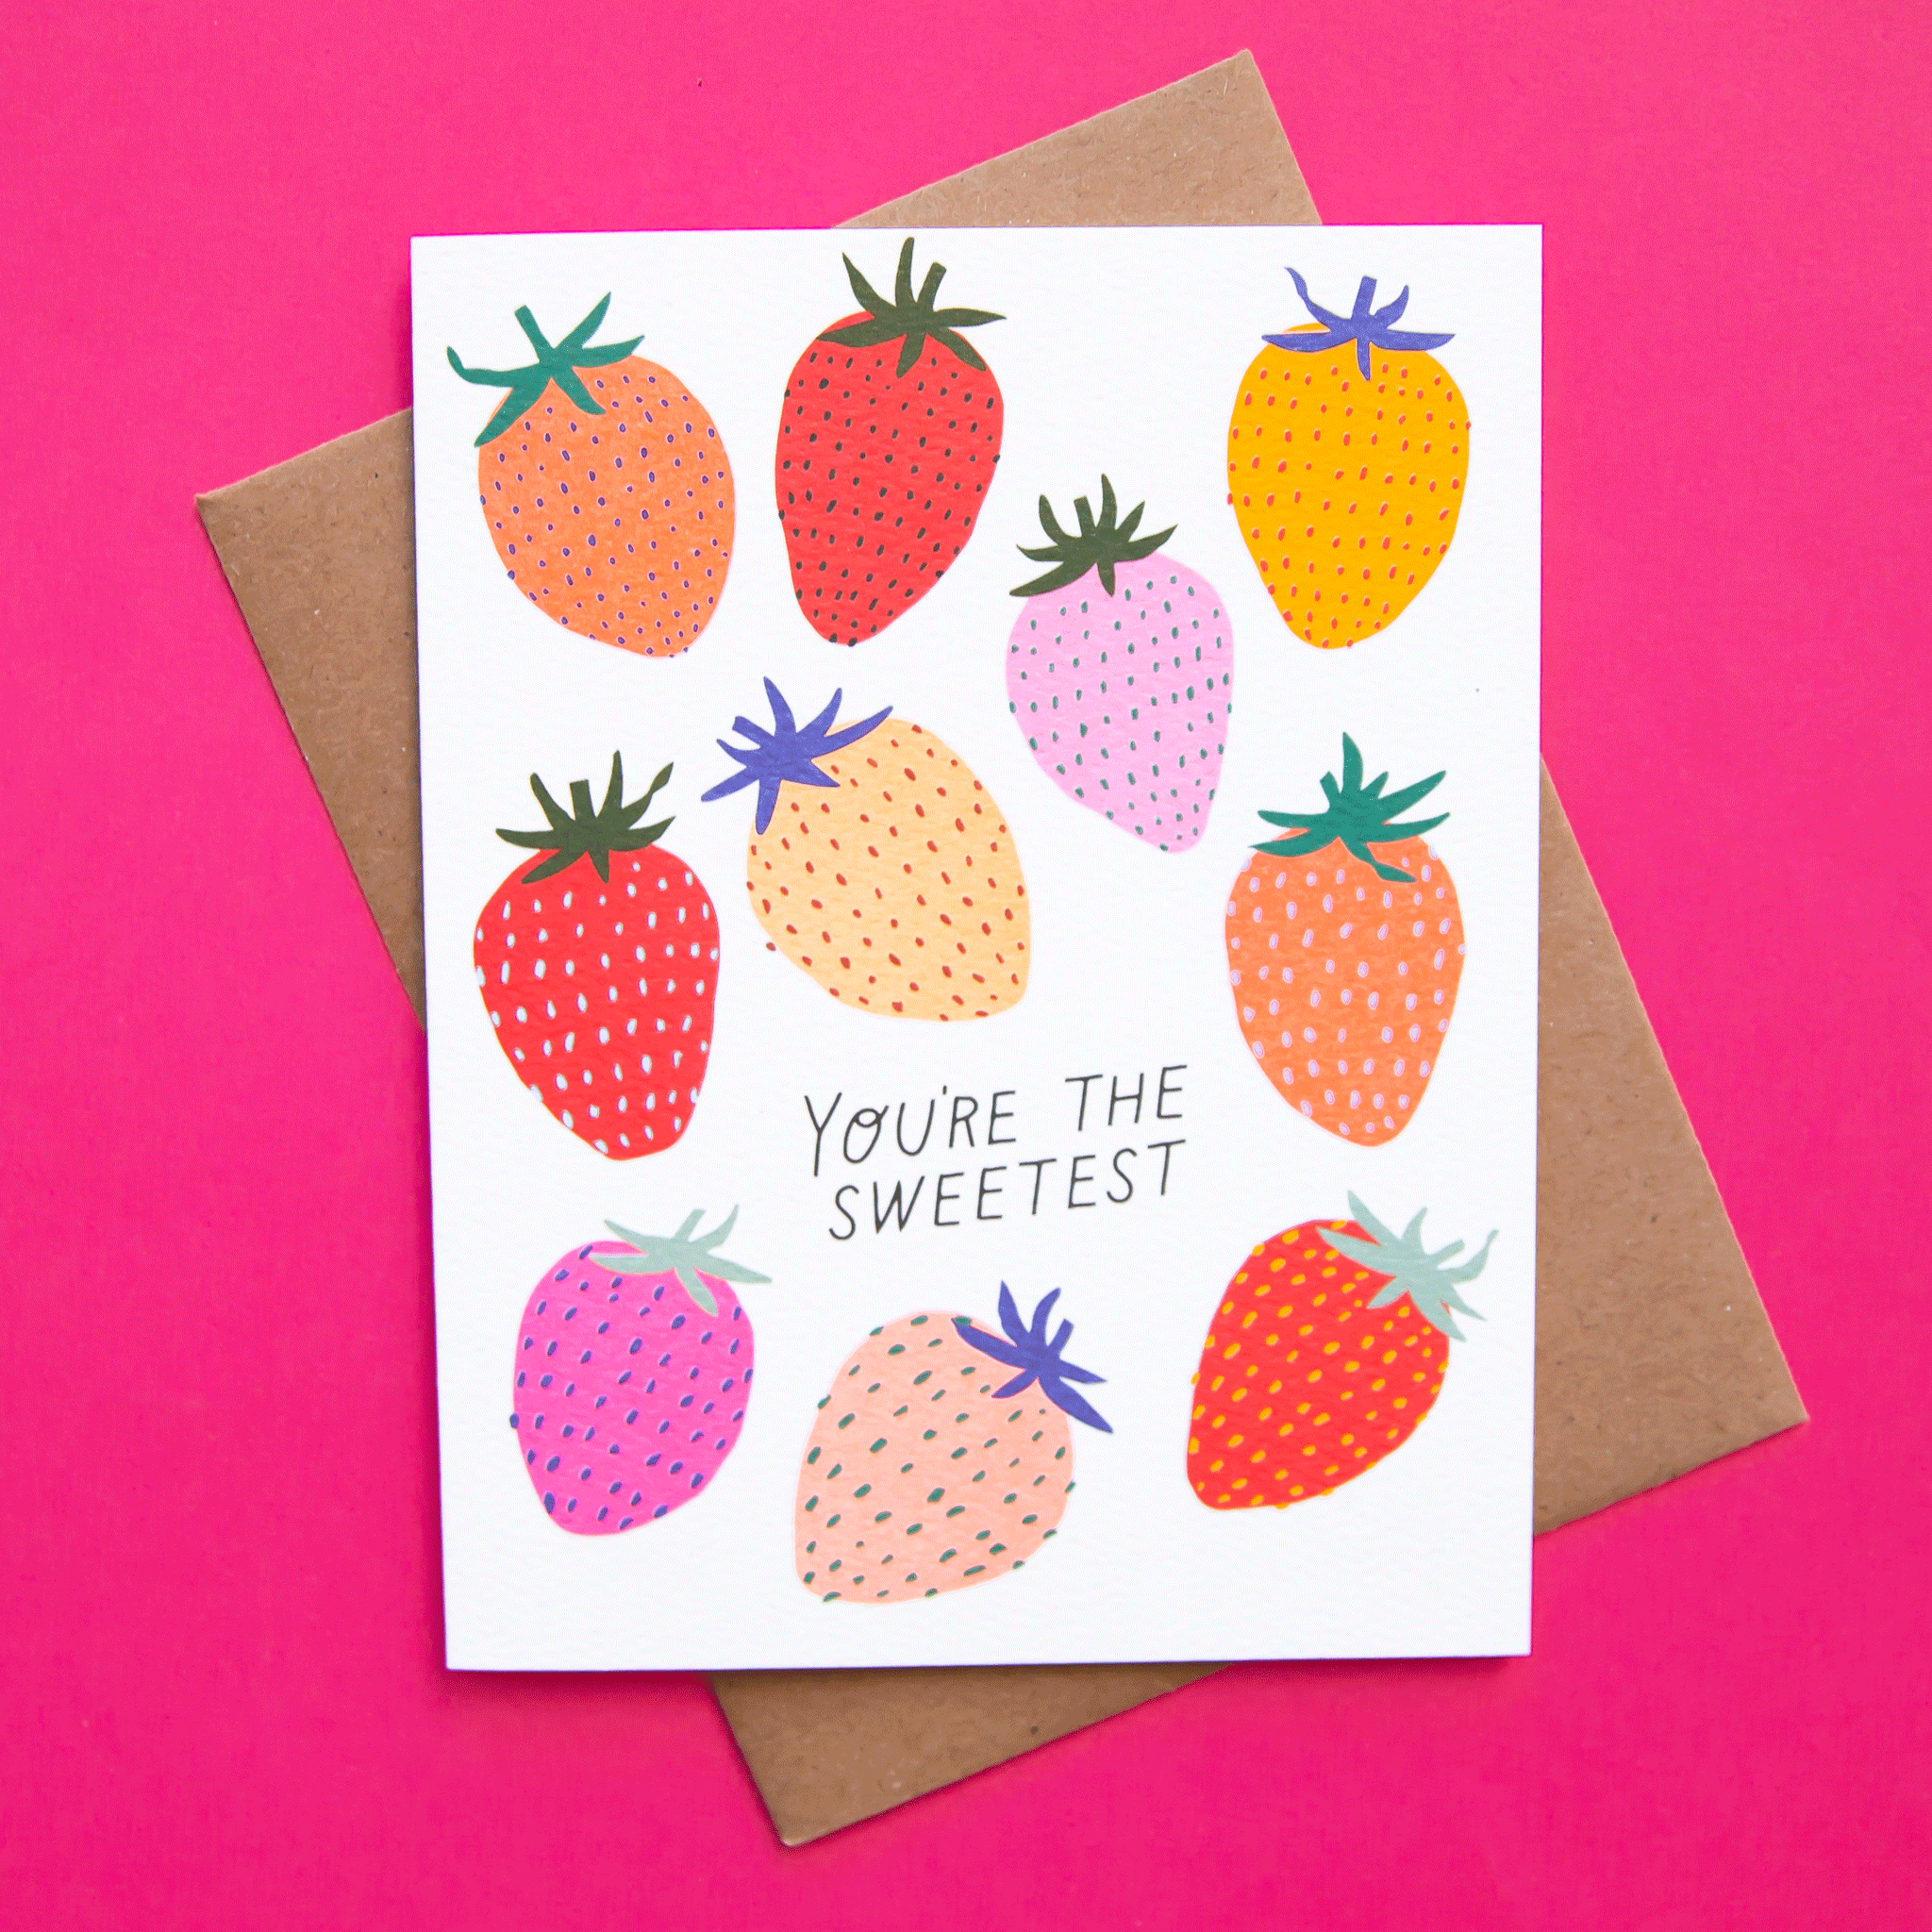 On a hot pink background is a white greeting card with various strawberry prints on the front in shades of red, pink and yellow along with text in the center that reads, "You're The Sweetest".